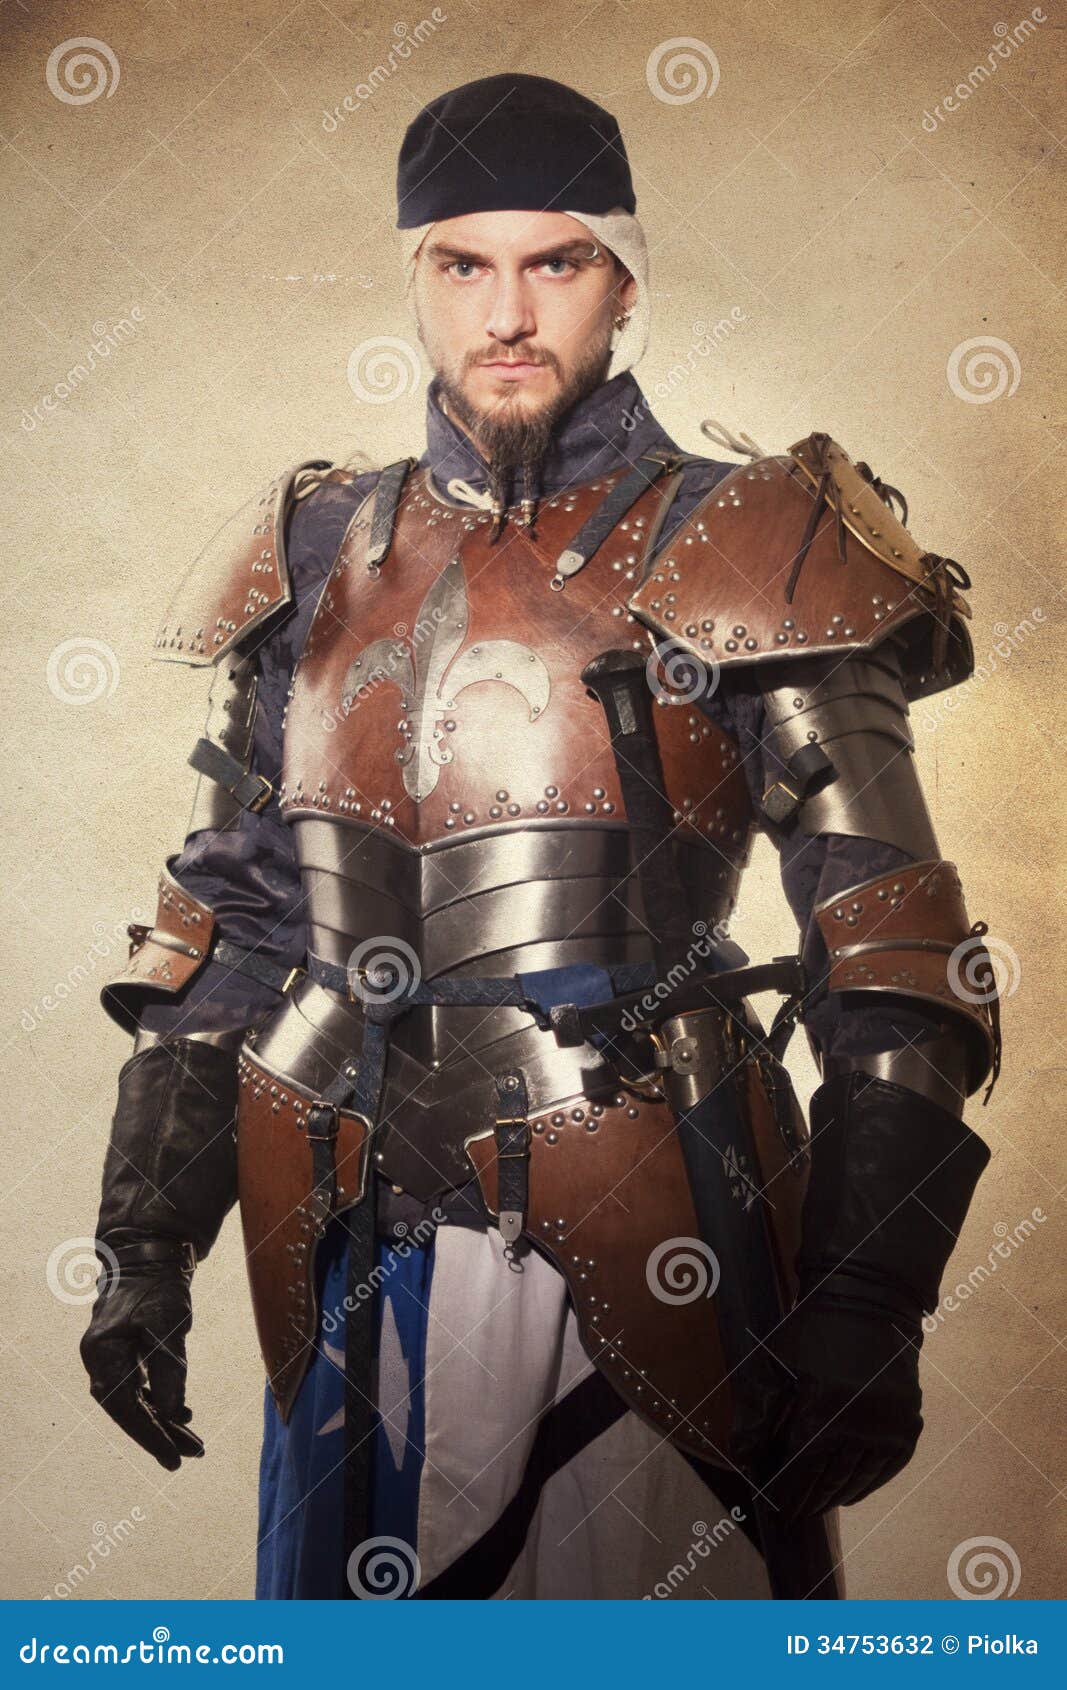 Medieval knight stock photo. Image of larp, battle, play - 34753632